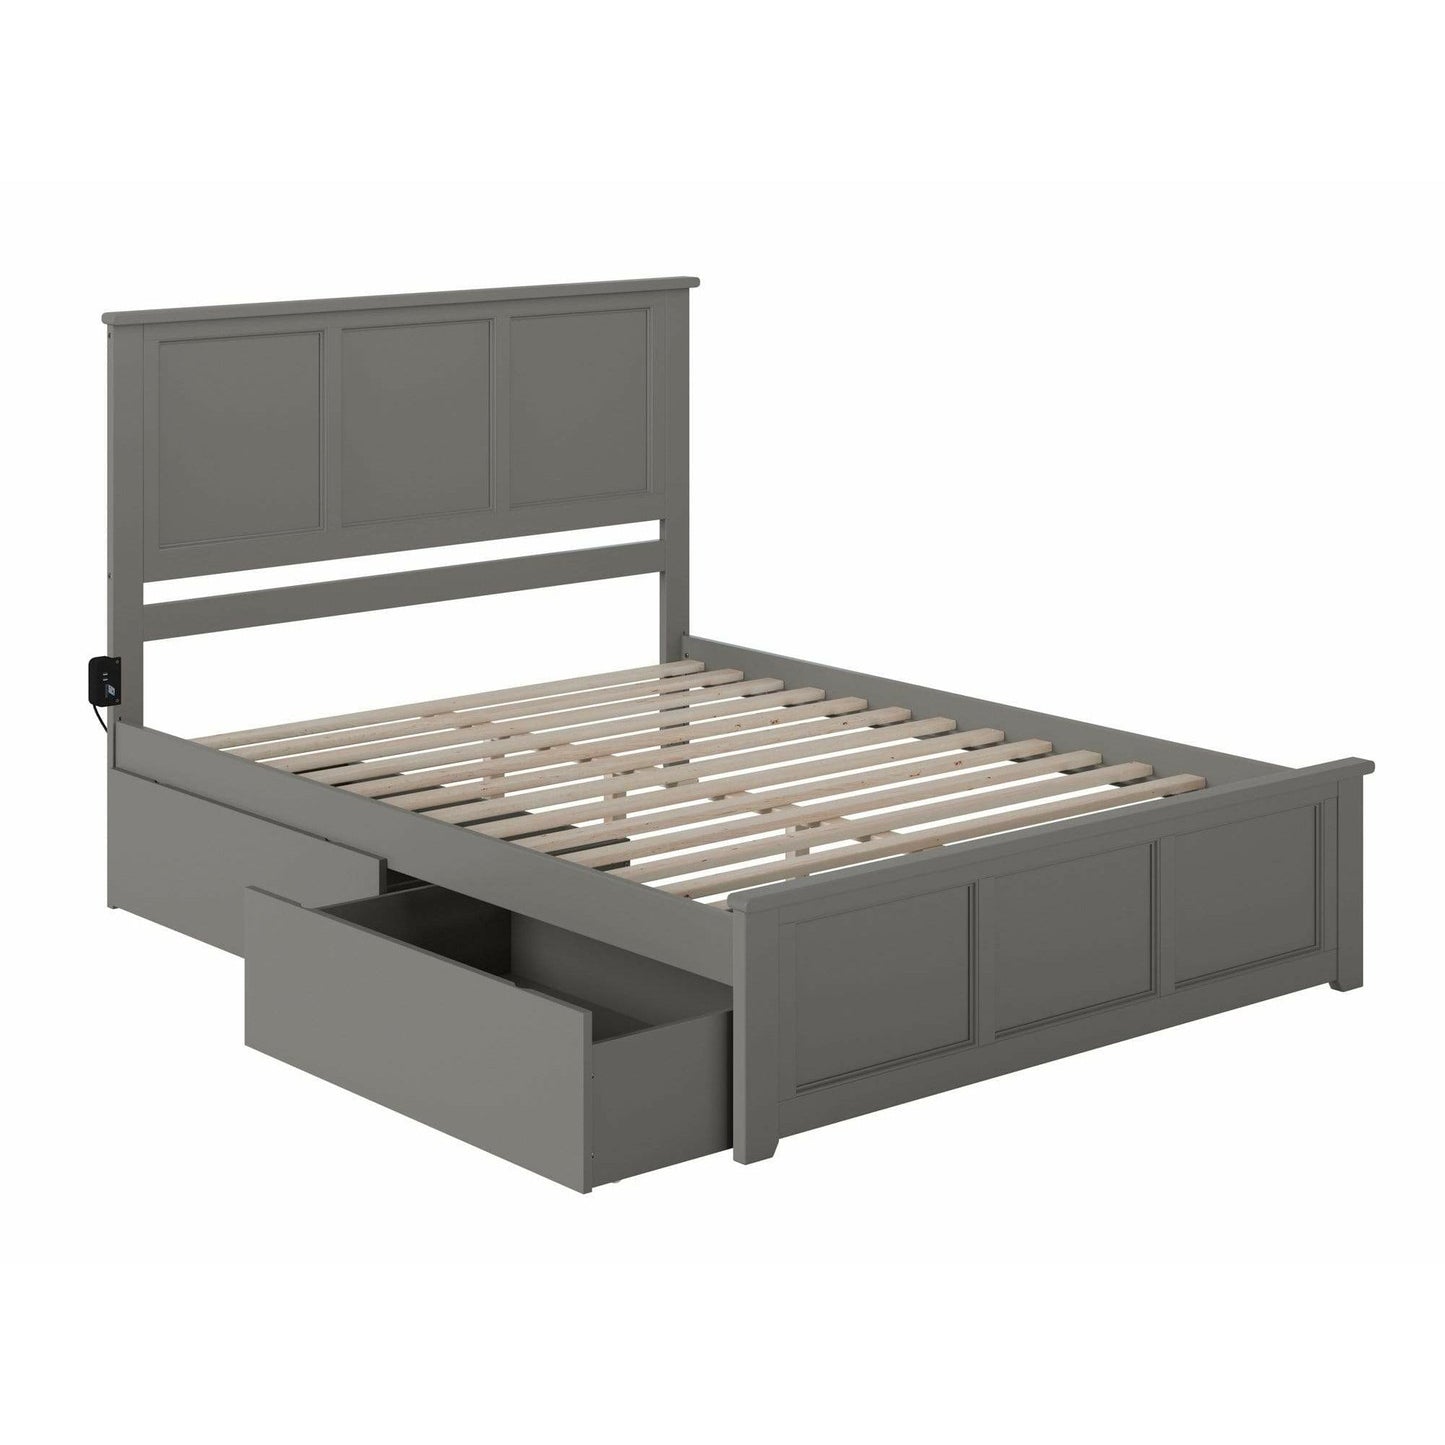 Atlantic Furniture Bed Grey Madison Queen Platform Bed with Matching Foot Board with 2 Urban Bed Drawers in Espresso